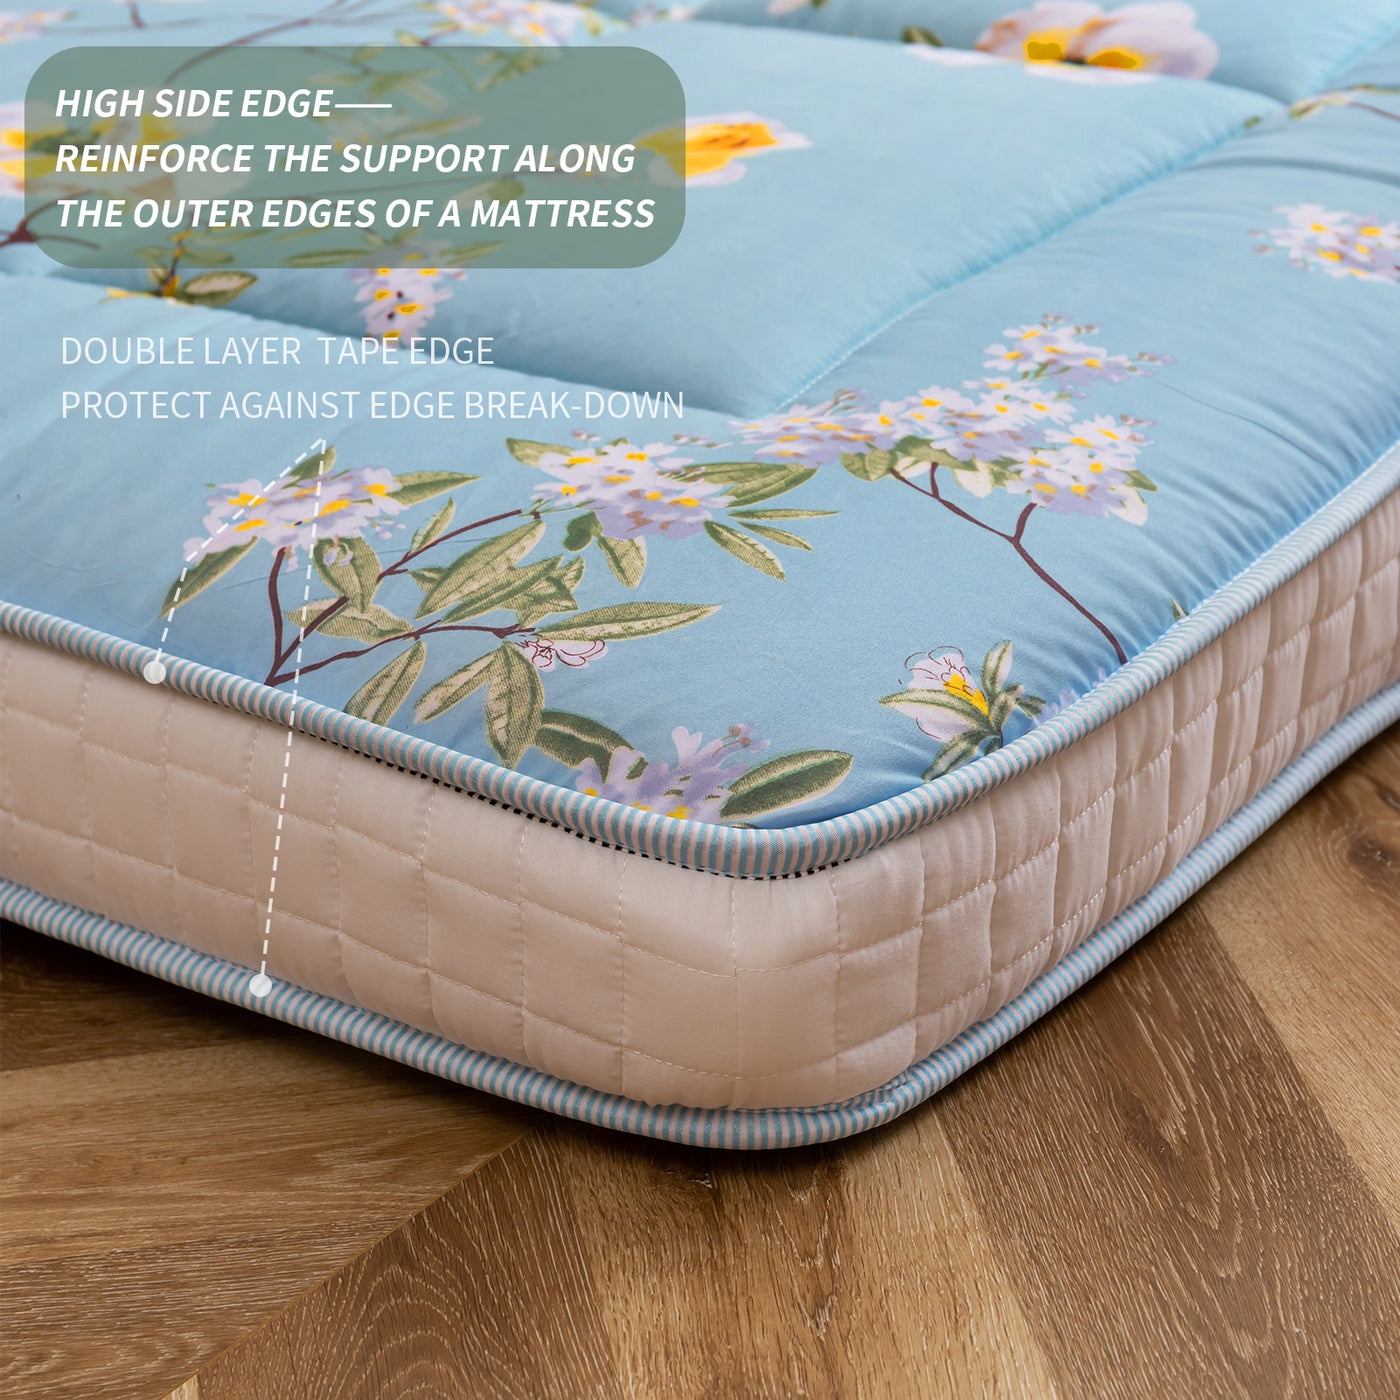 MAXYOYO Rustic Floral Korean Padded Japanese Futon Mattress, Quilted Bed Mattress Topper, Folding Sleeping Pad Guest Bed for Camping Couch